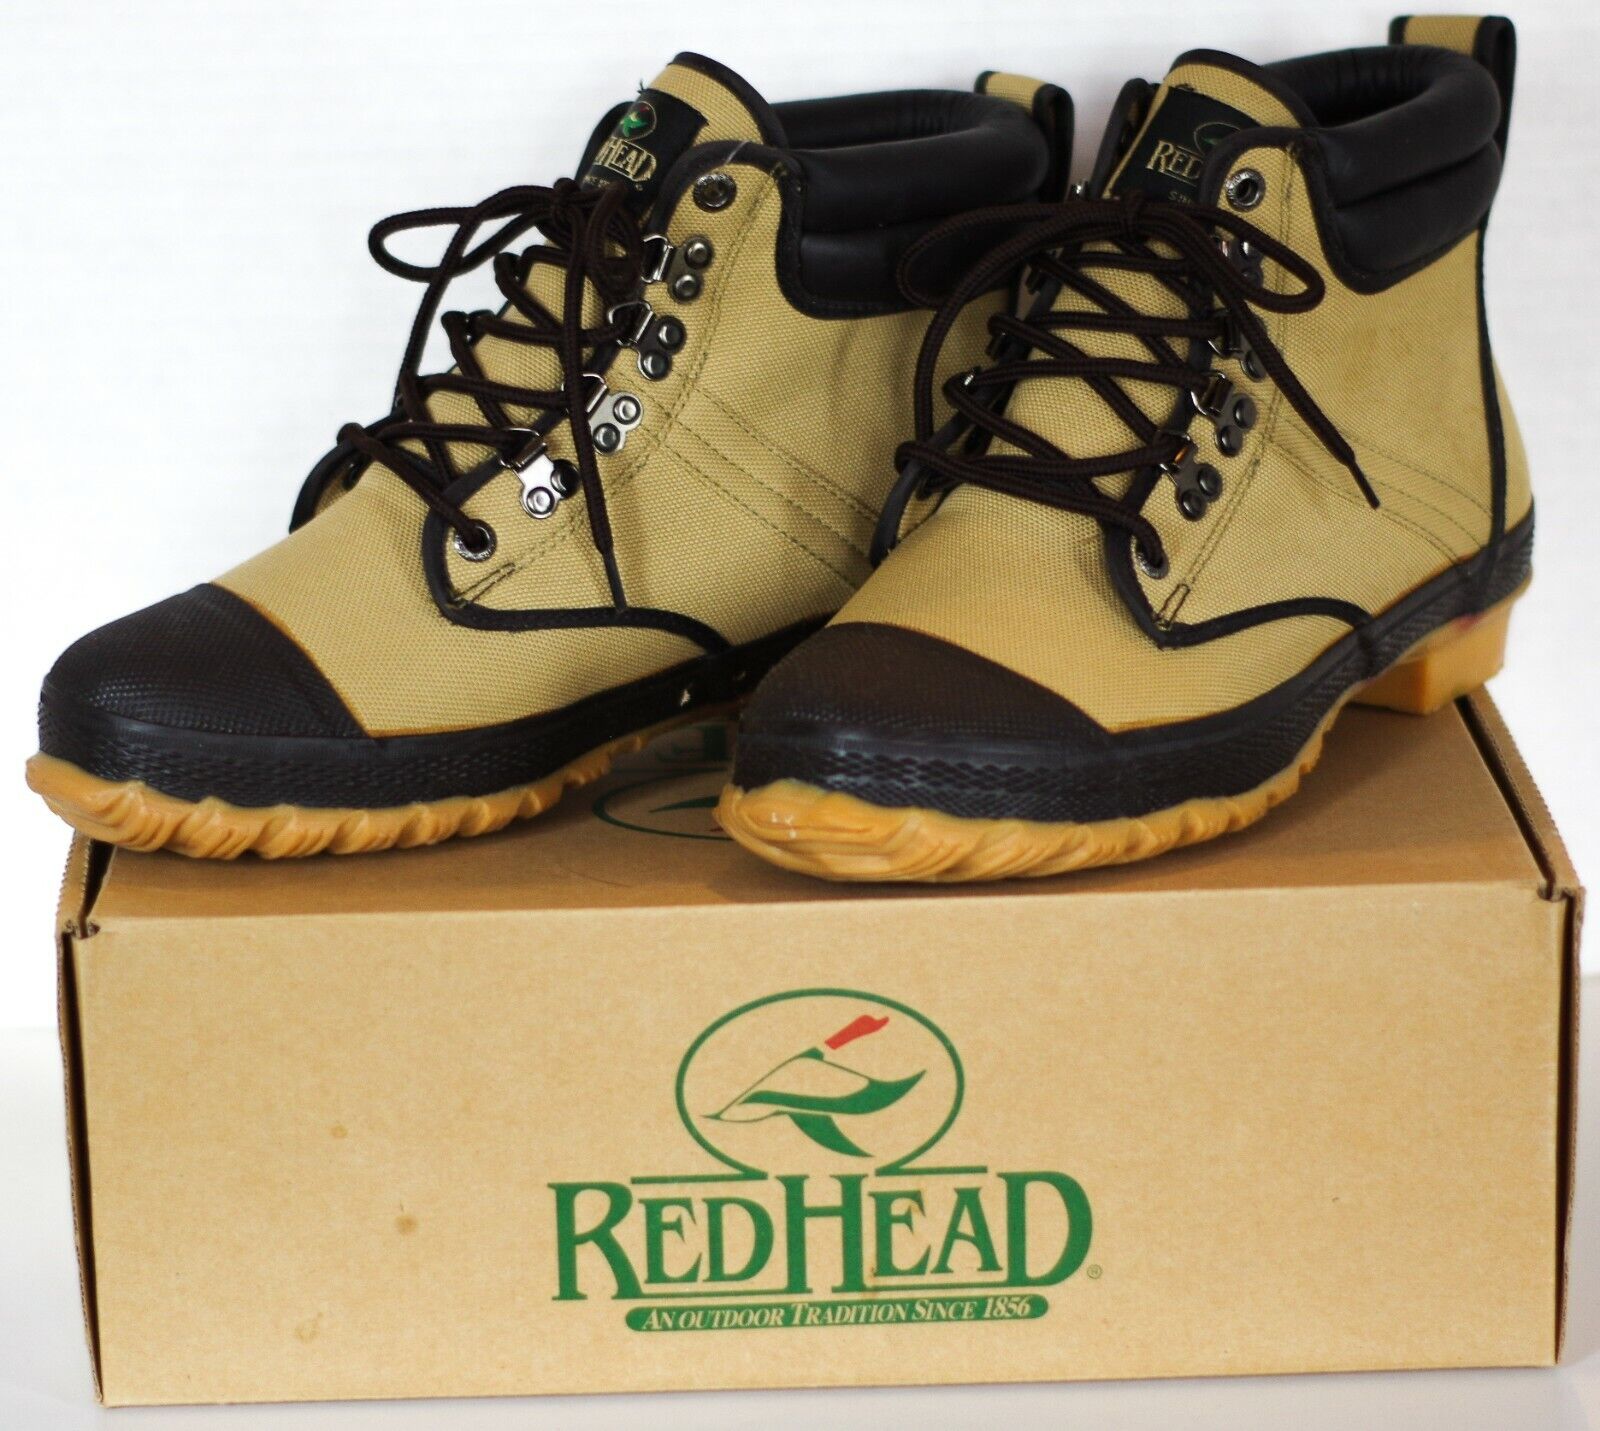 Redhead Hobbs Creek Cleated Wading Los Angeles Mall Boots 5 ☆ very popular 9 Men's size New Brand